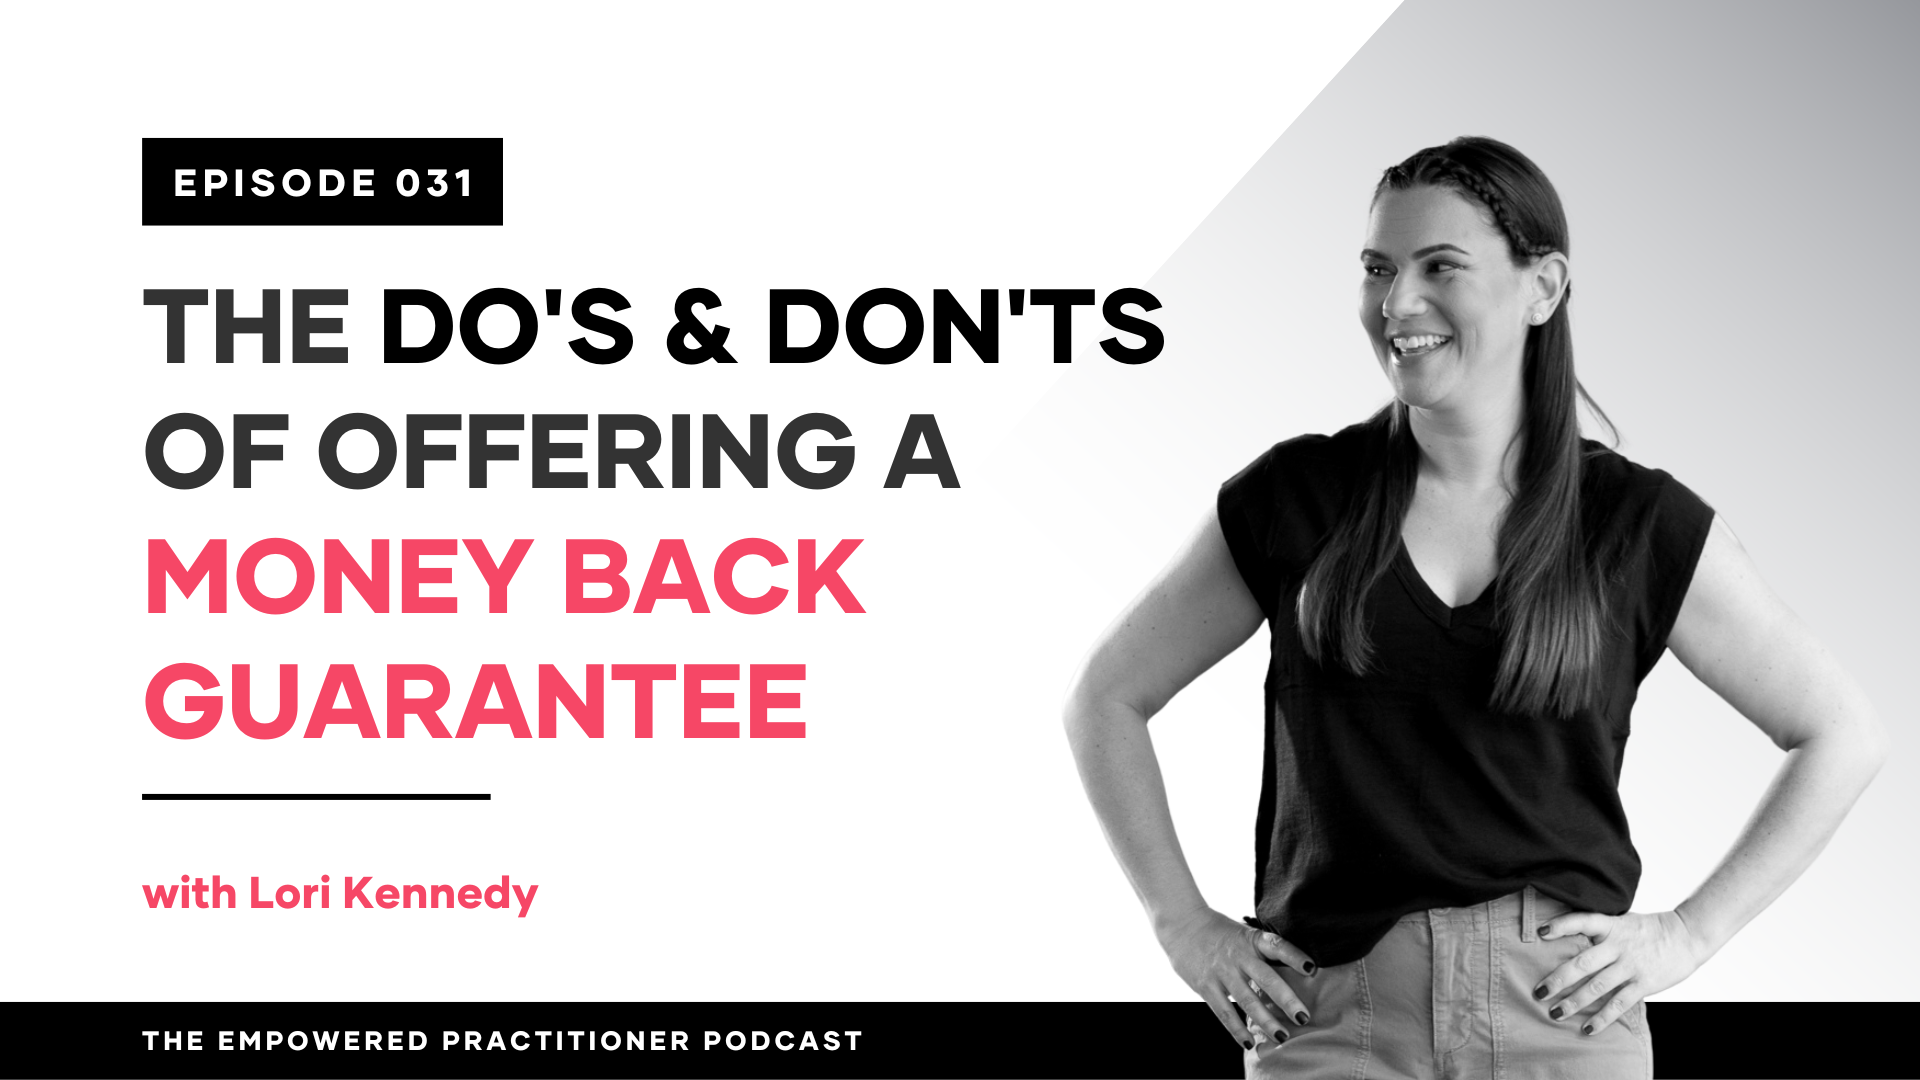 The Dos and Don’ts of Offering A Money Back Guarantee